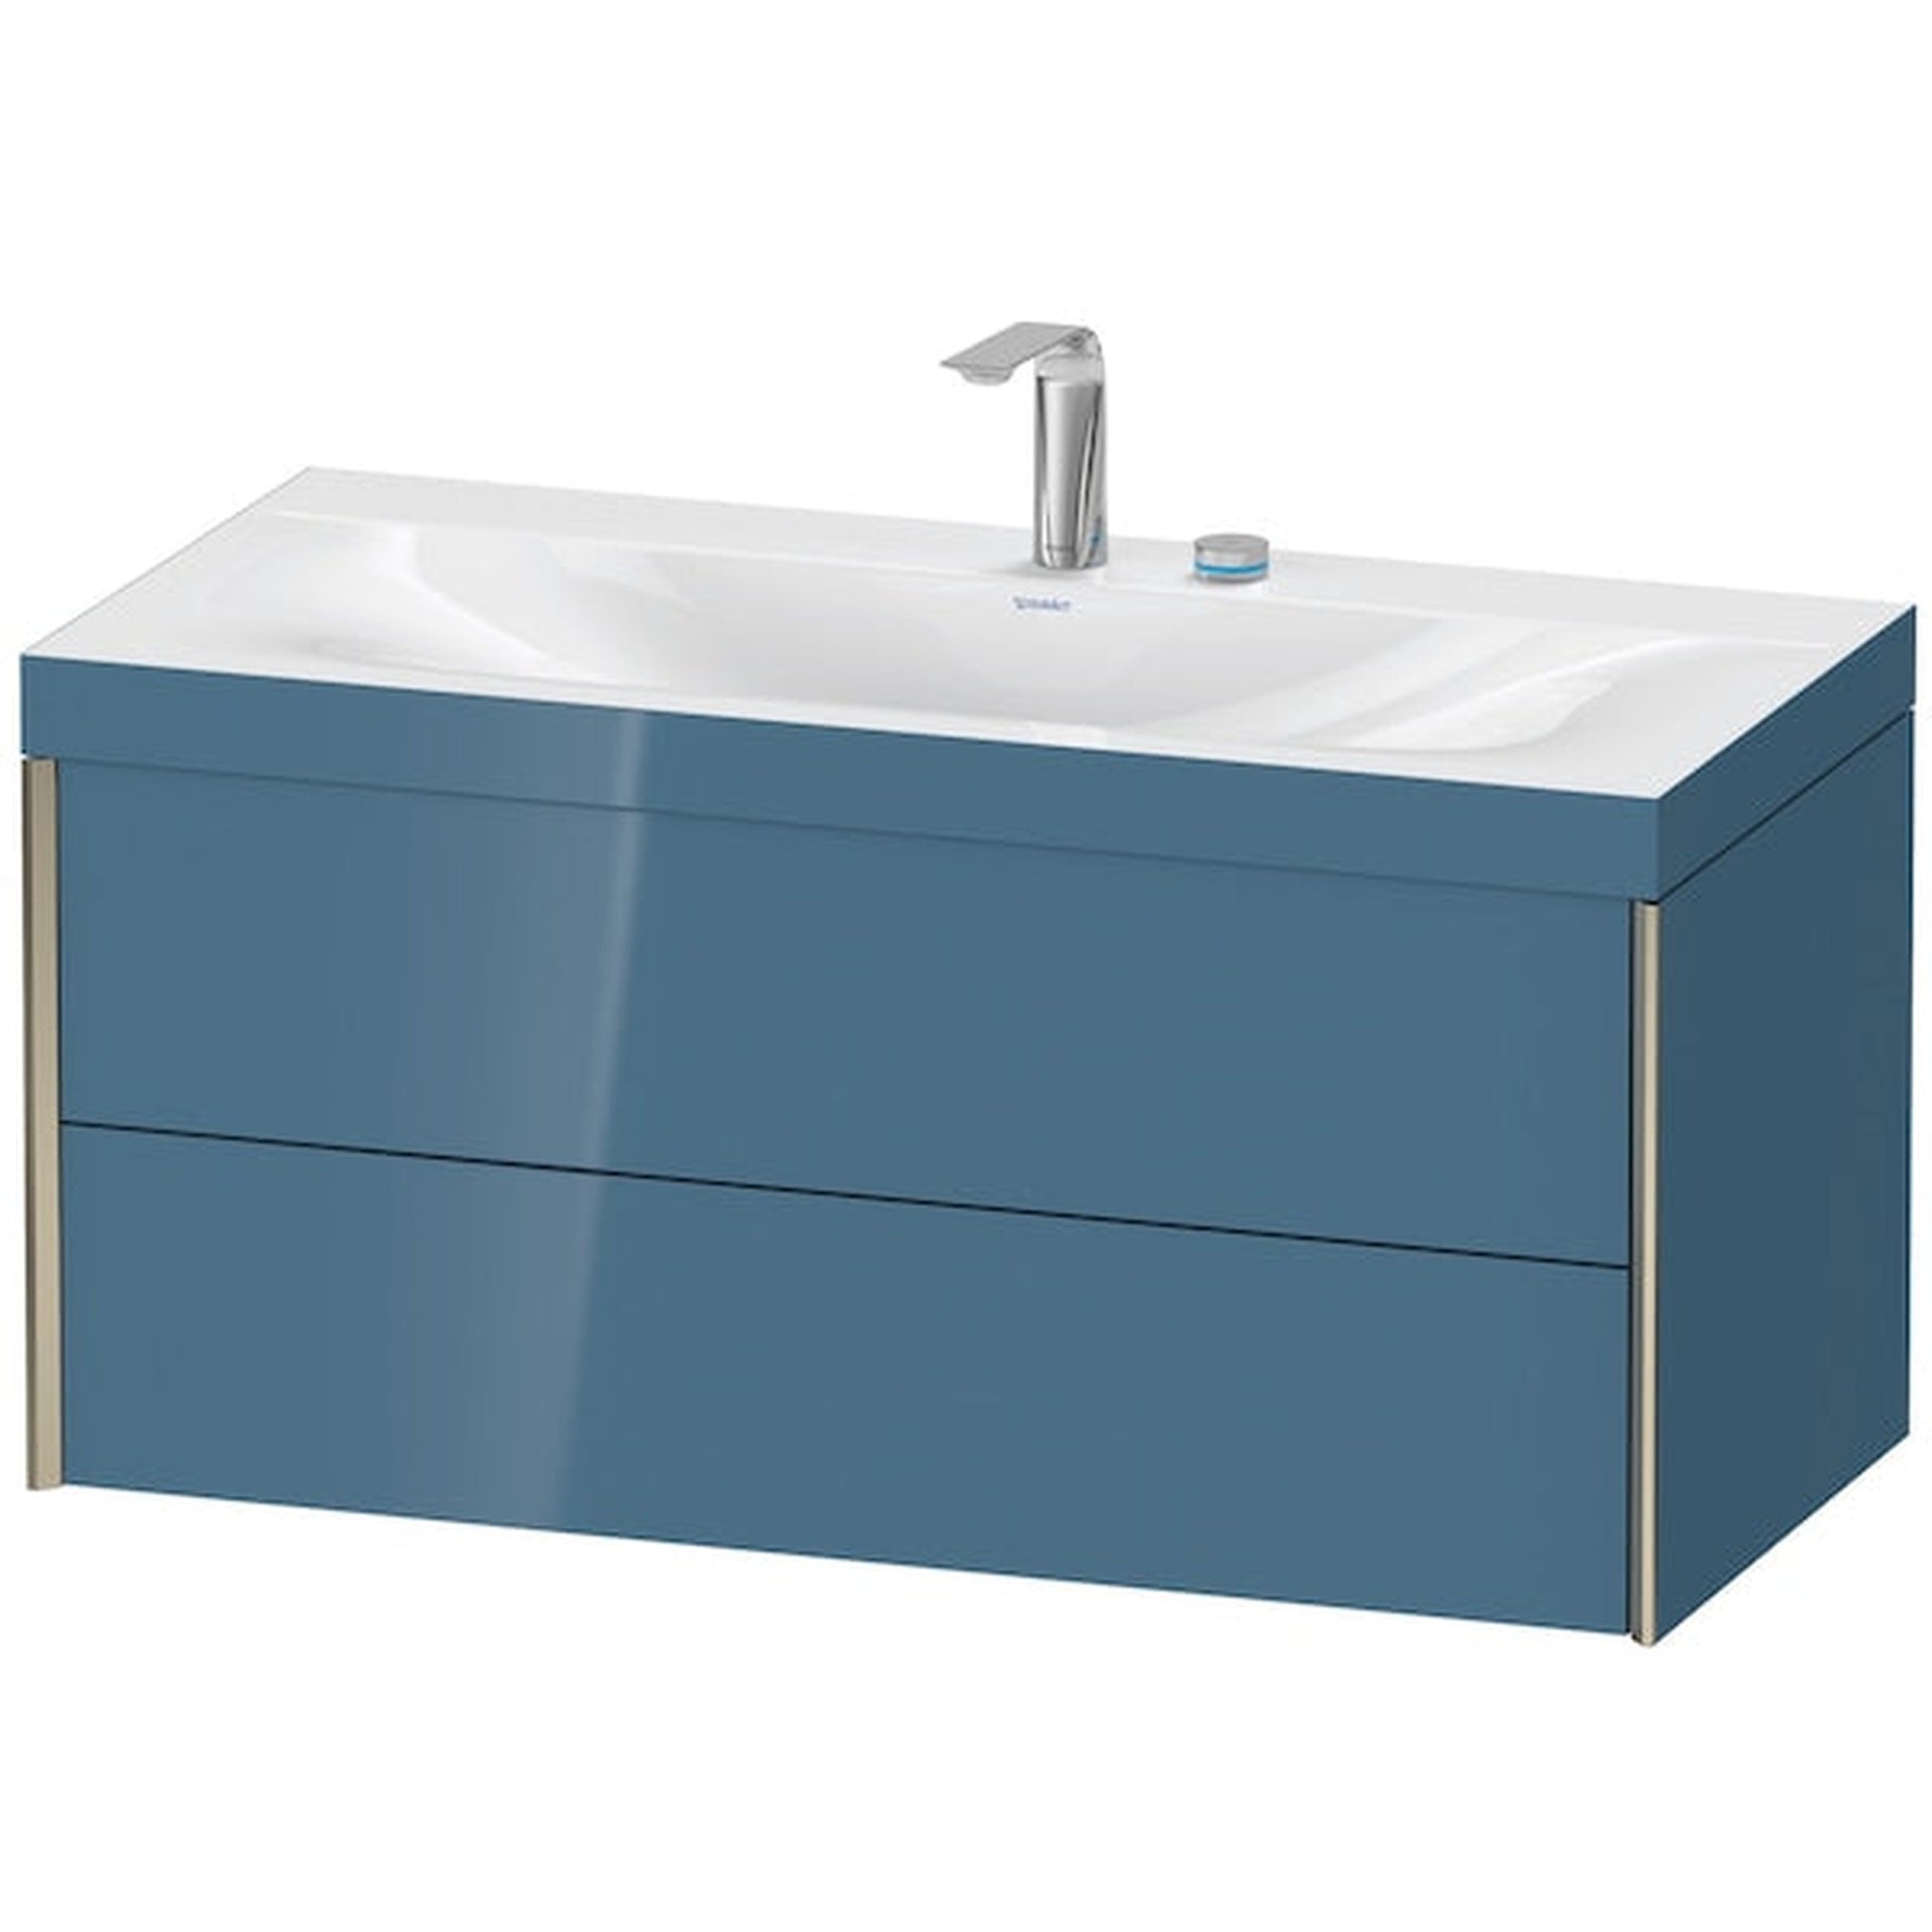 Duravit Xviu 39" x 20" x 19" Two Drawer C-Bonded Wall-Mount Vanity Kit With Two Tap Holes, Stone Blue (XV4616EB147C)